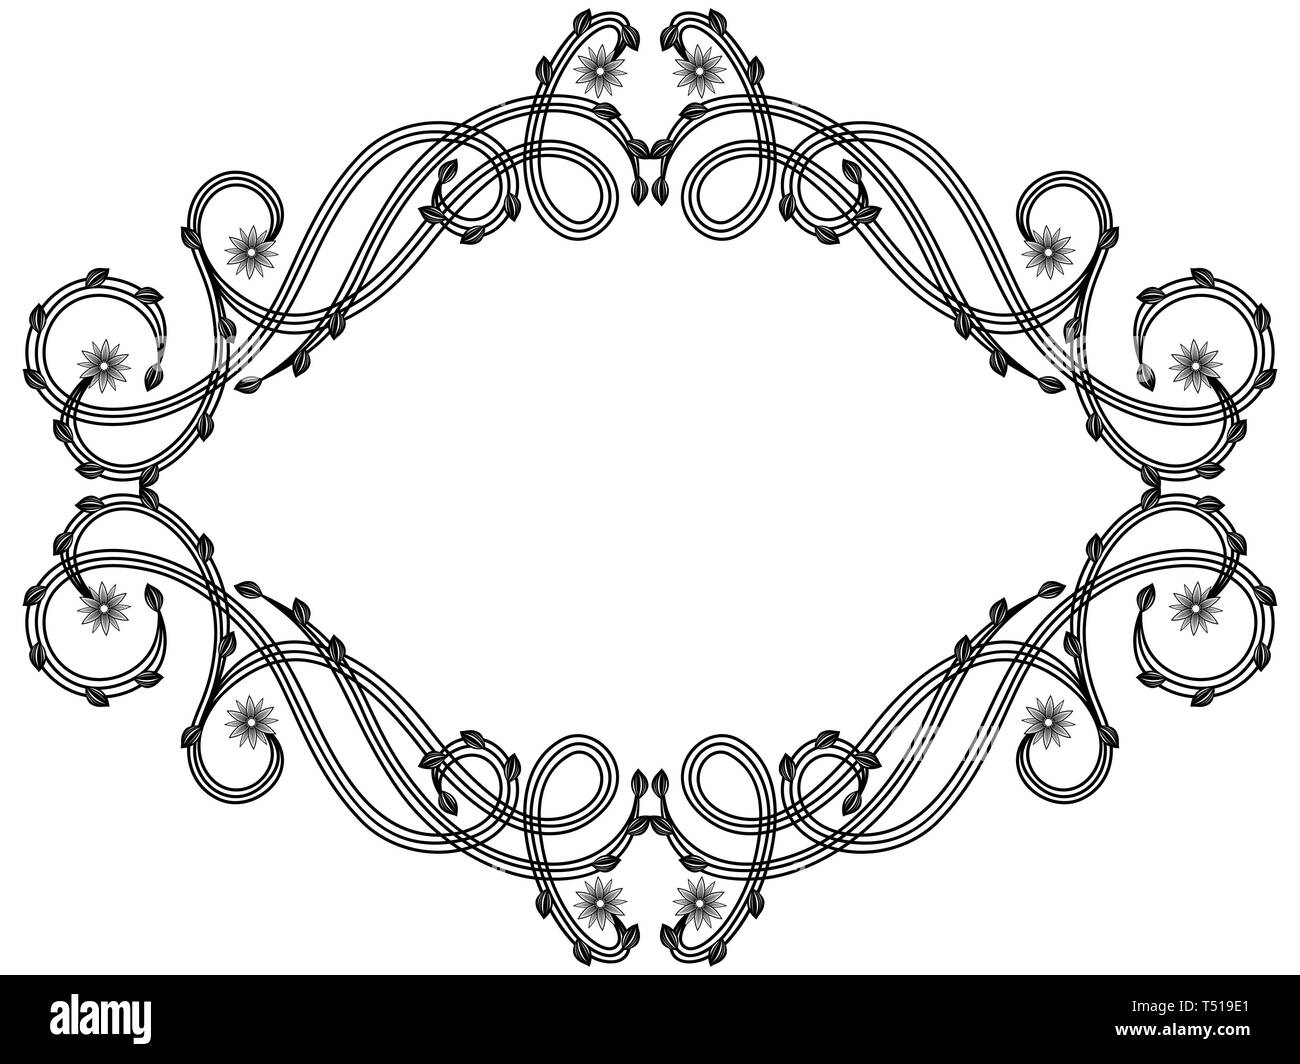 Decorative Victorian floral frame with interlaced lines isolated on the ...